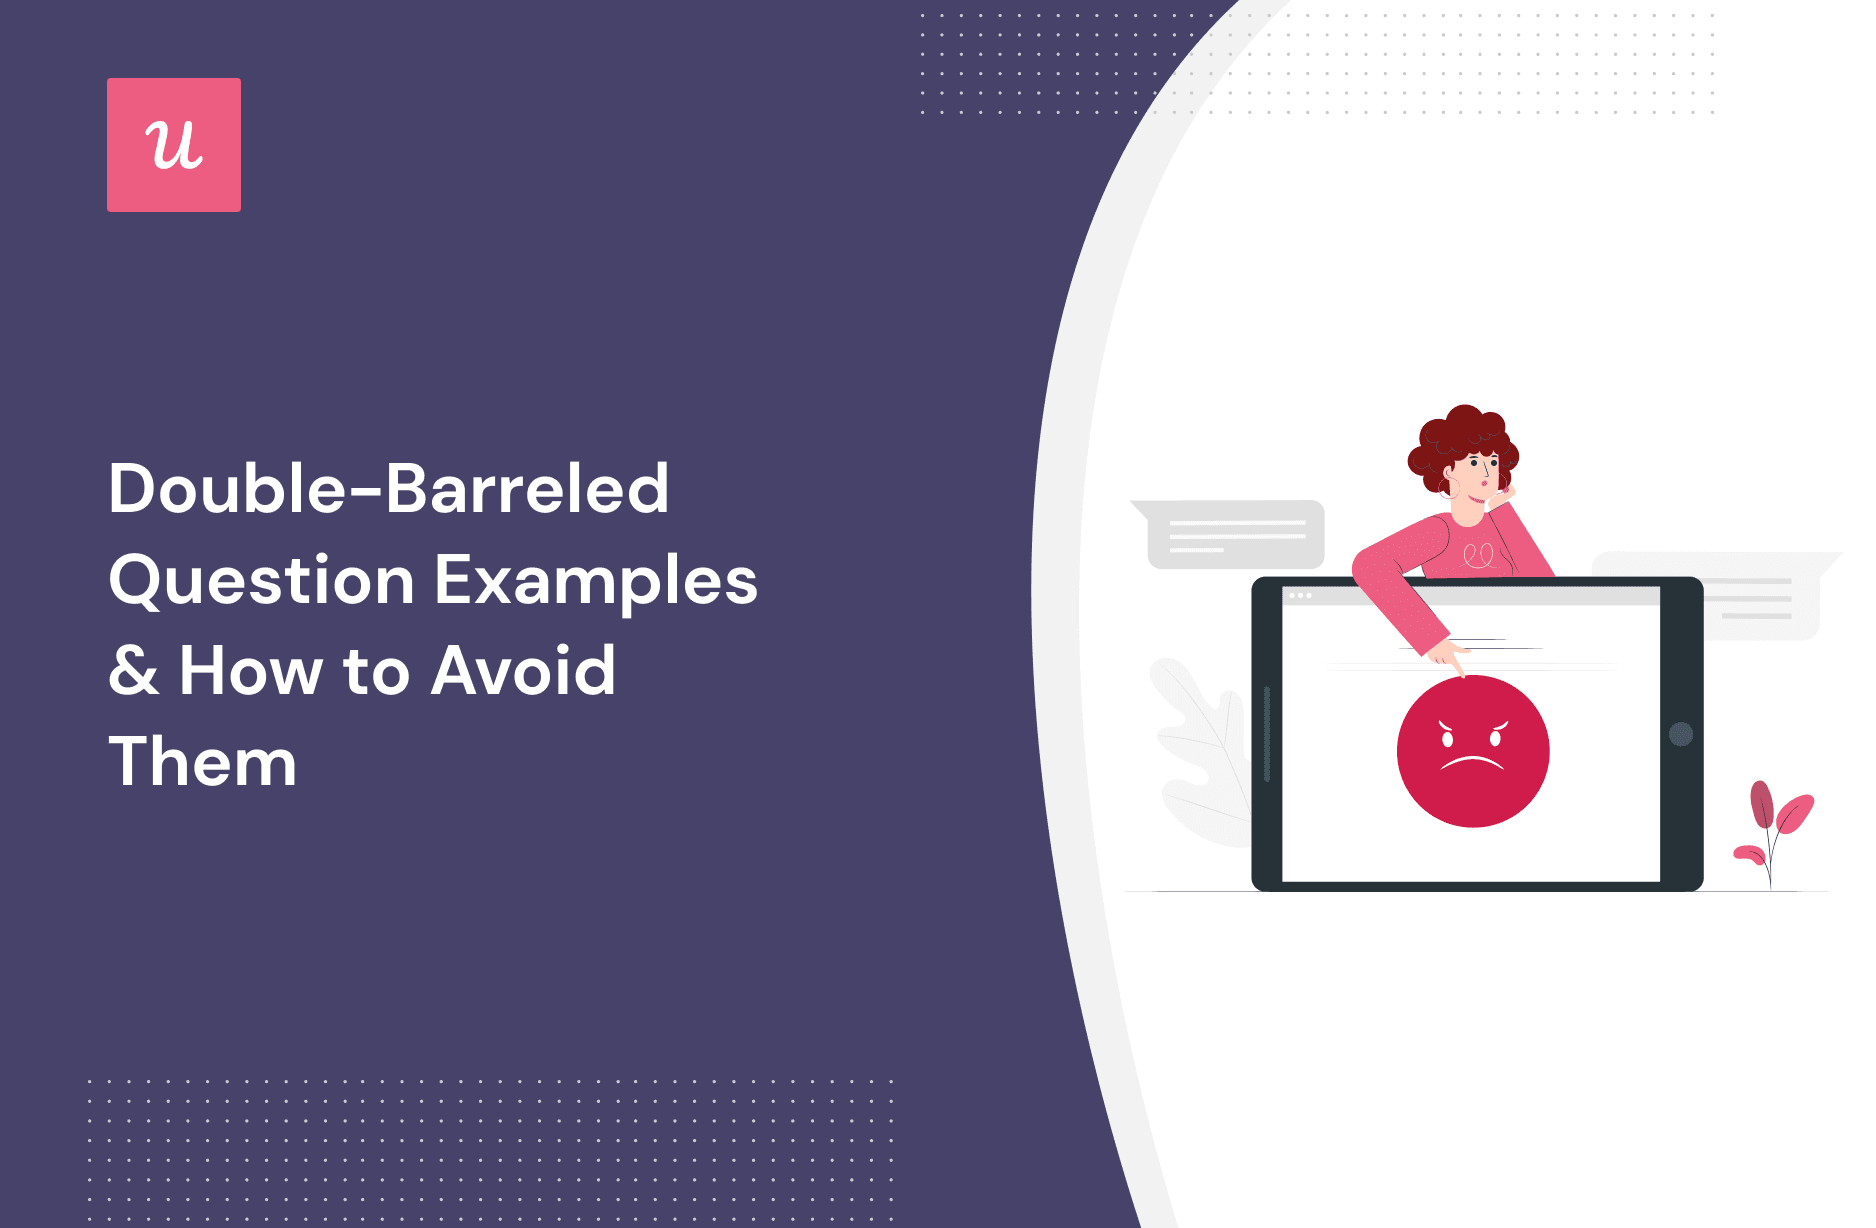 Double-Barreled Question Examples & How to Avoid Them cover